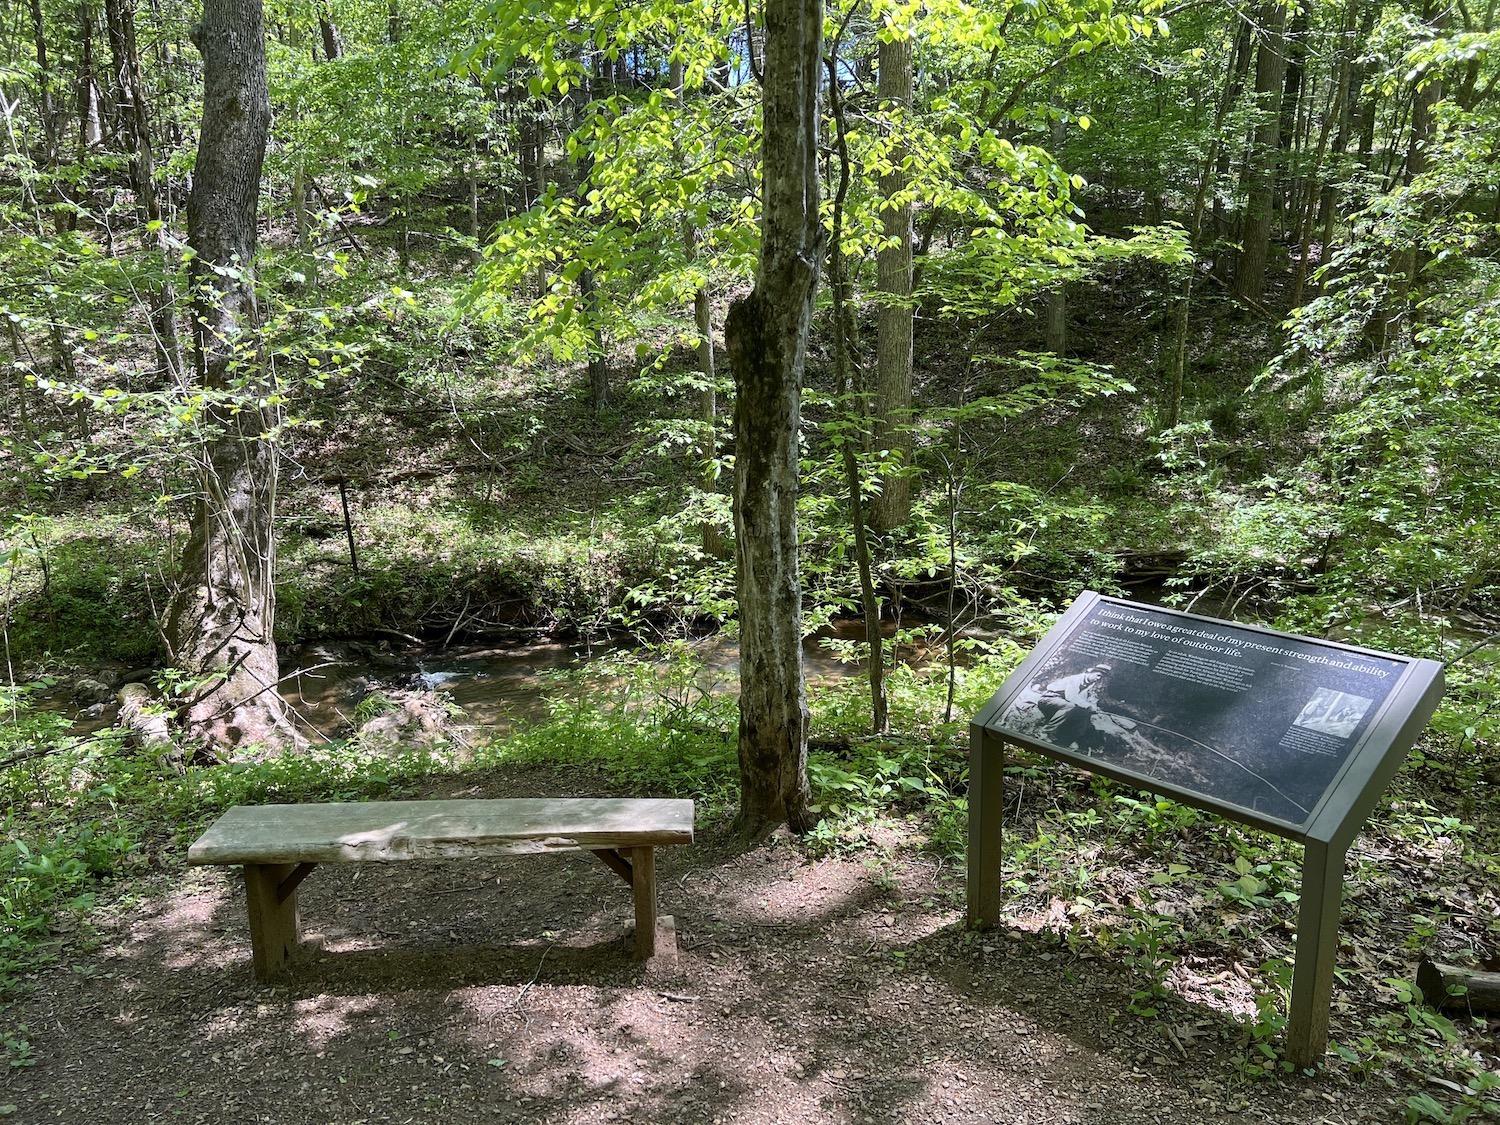 An interpretive panel and bench along Jack-O-Lantern Branch Trail at Booker T. Washington National Monument in Virginia.